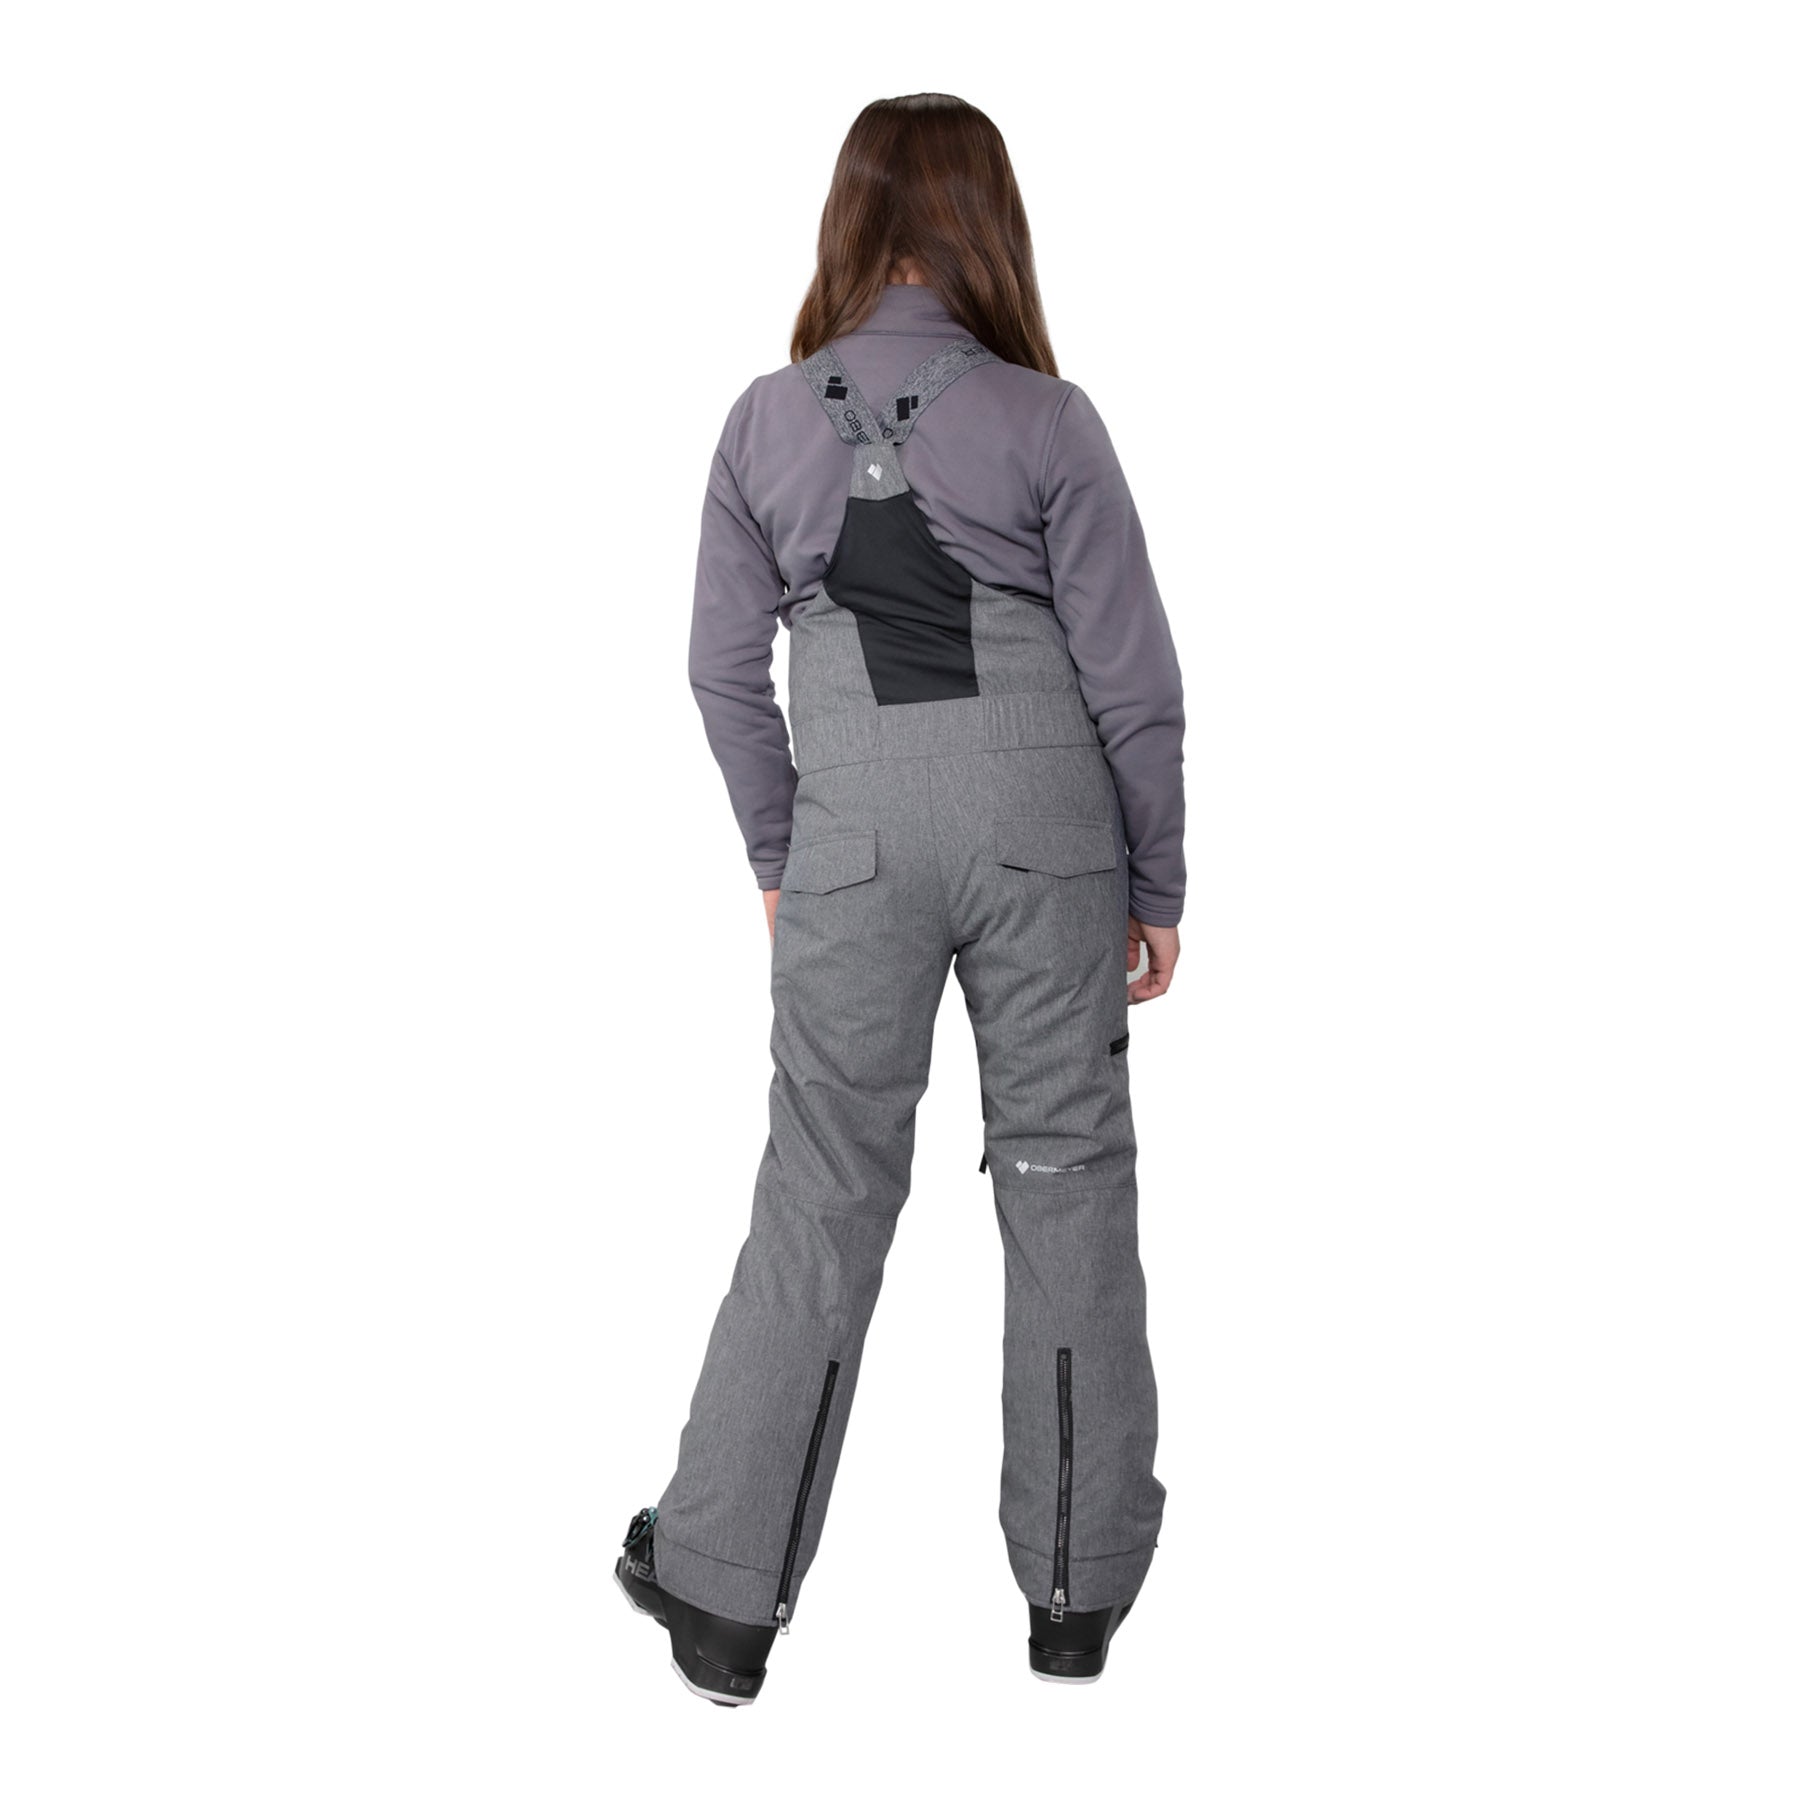 Image features a model wearing the Obermeyer girls Anya Bib Pant in light grey with black ski boots and a grey long sleeve.